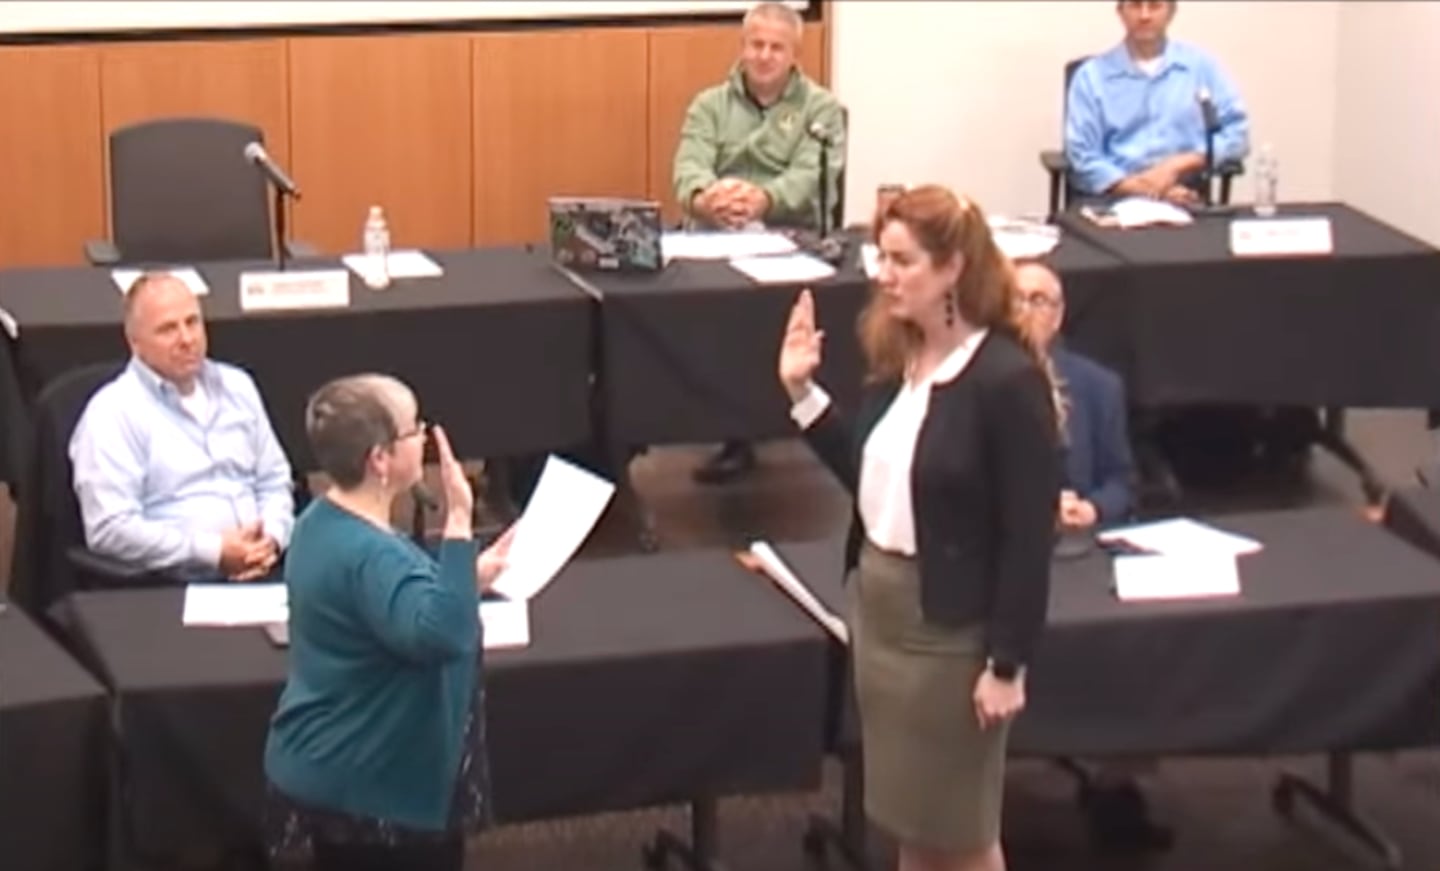 First Ward Alderwoman Carolyn Morris (right) takes the oath of office at the May 8, 2023 meeting of the DeKalb City Council.